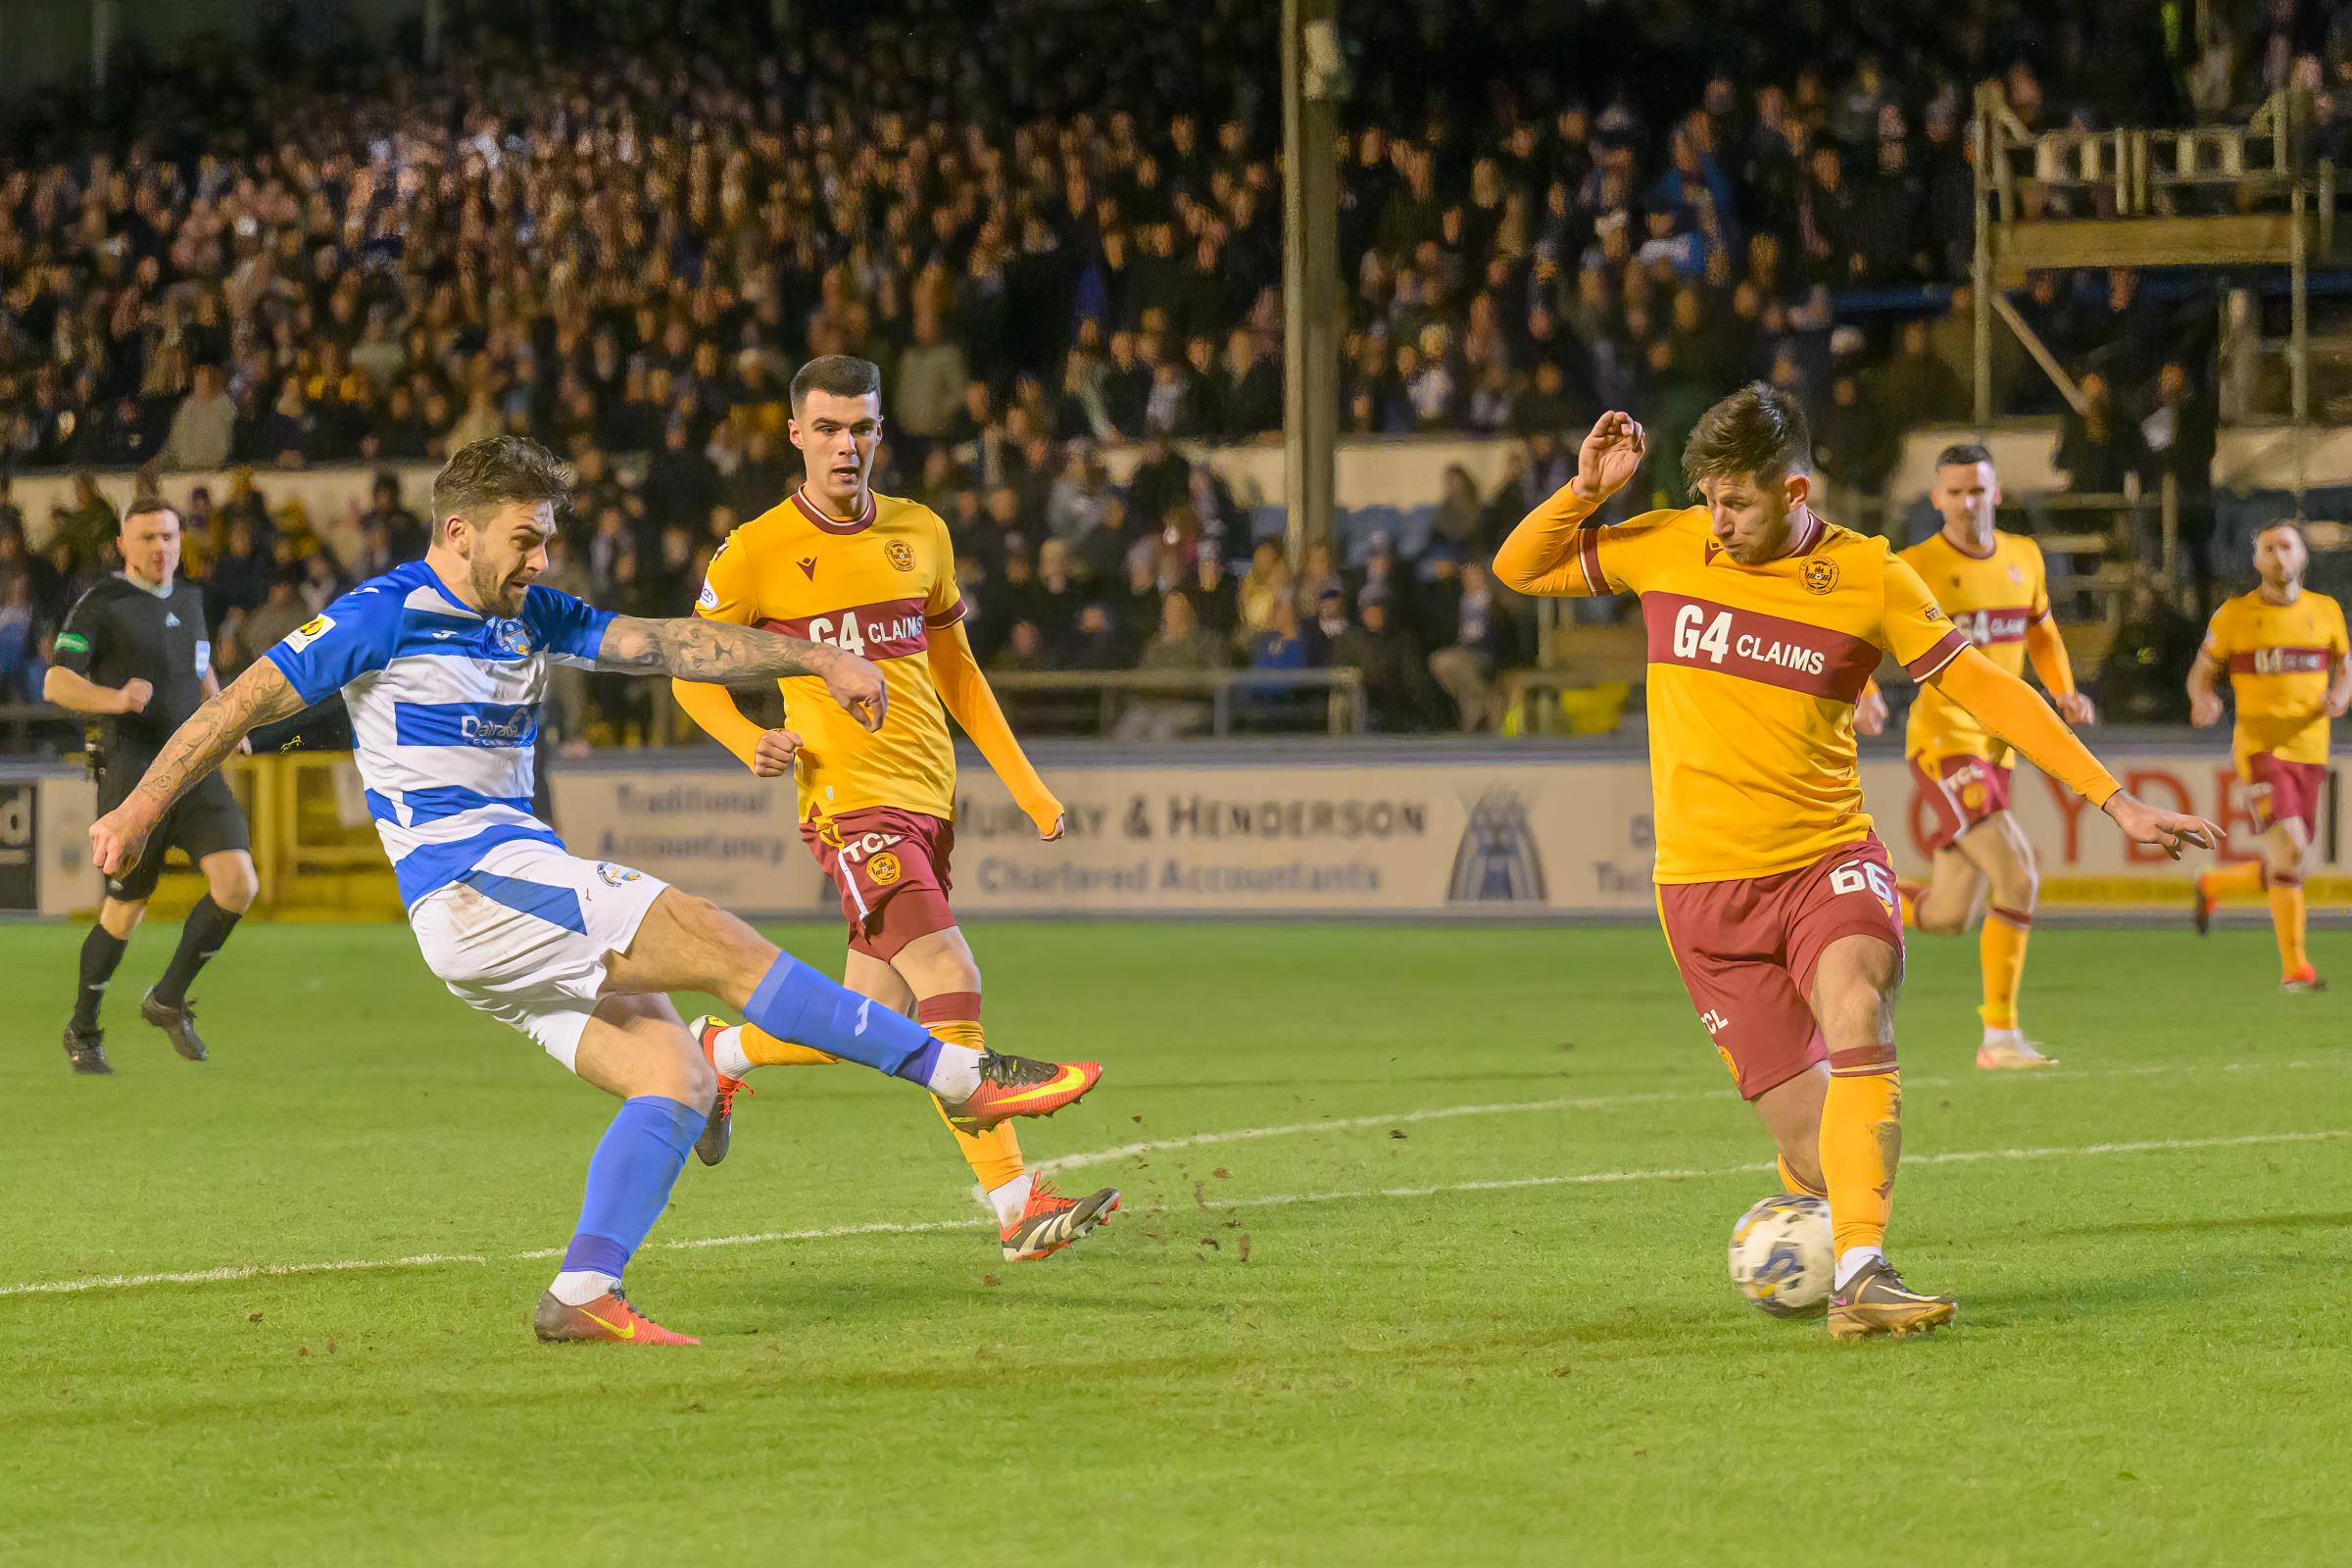 George Oakley thanks Morton team-mates for laying on goals